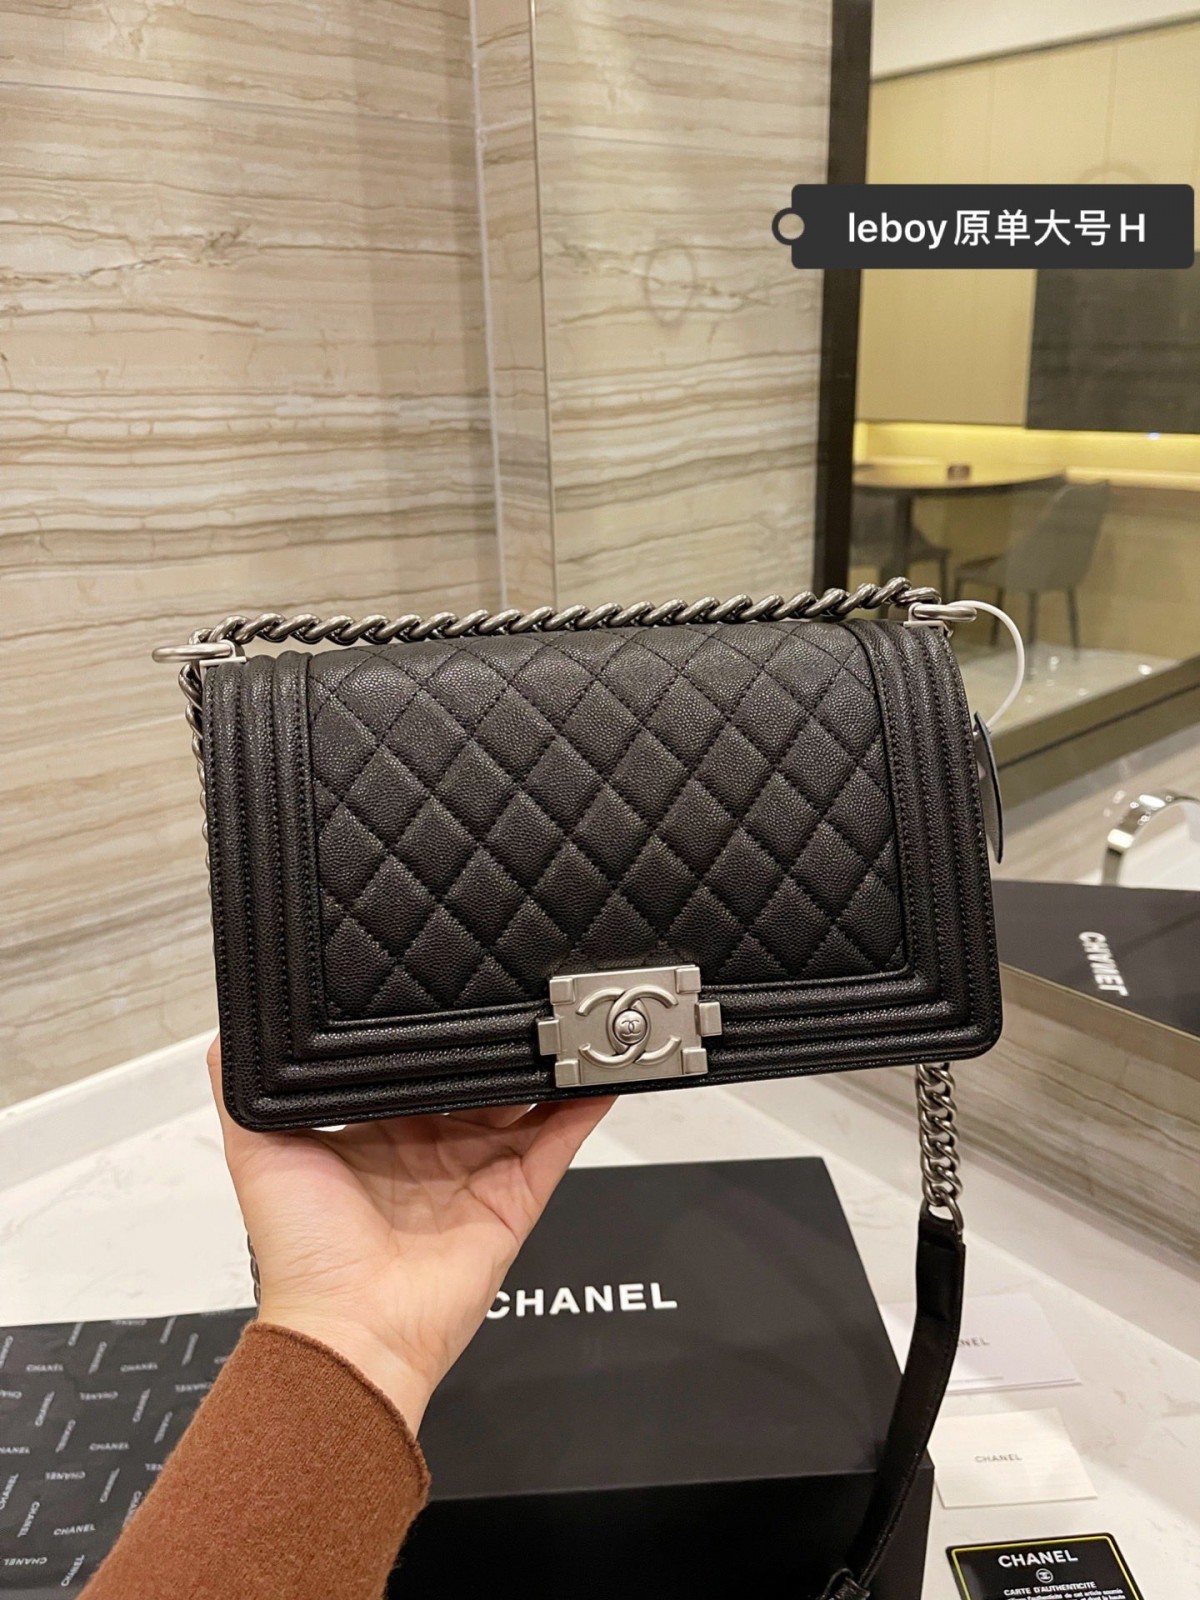 One of the coolest replica bags: Chanel Leboy (2022 Updated)-Best Quality Fake Louis Vuitton Bag Online Store, Replica designer bag ru